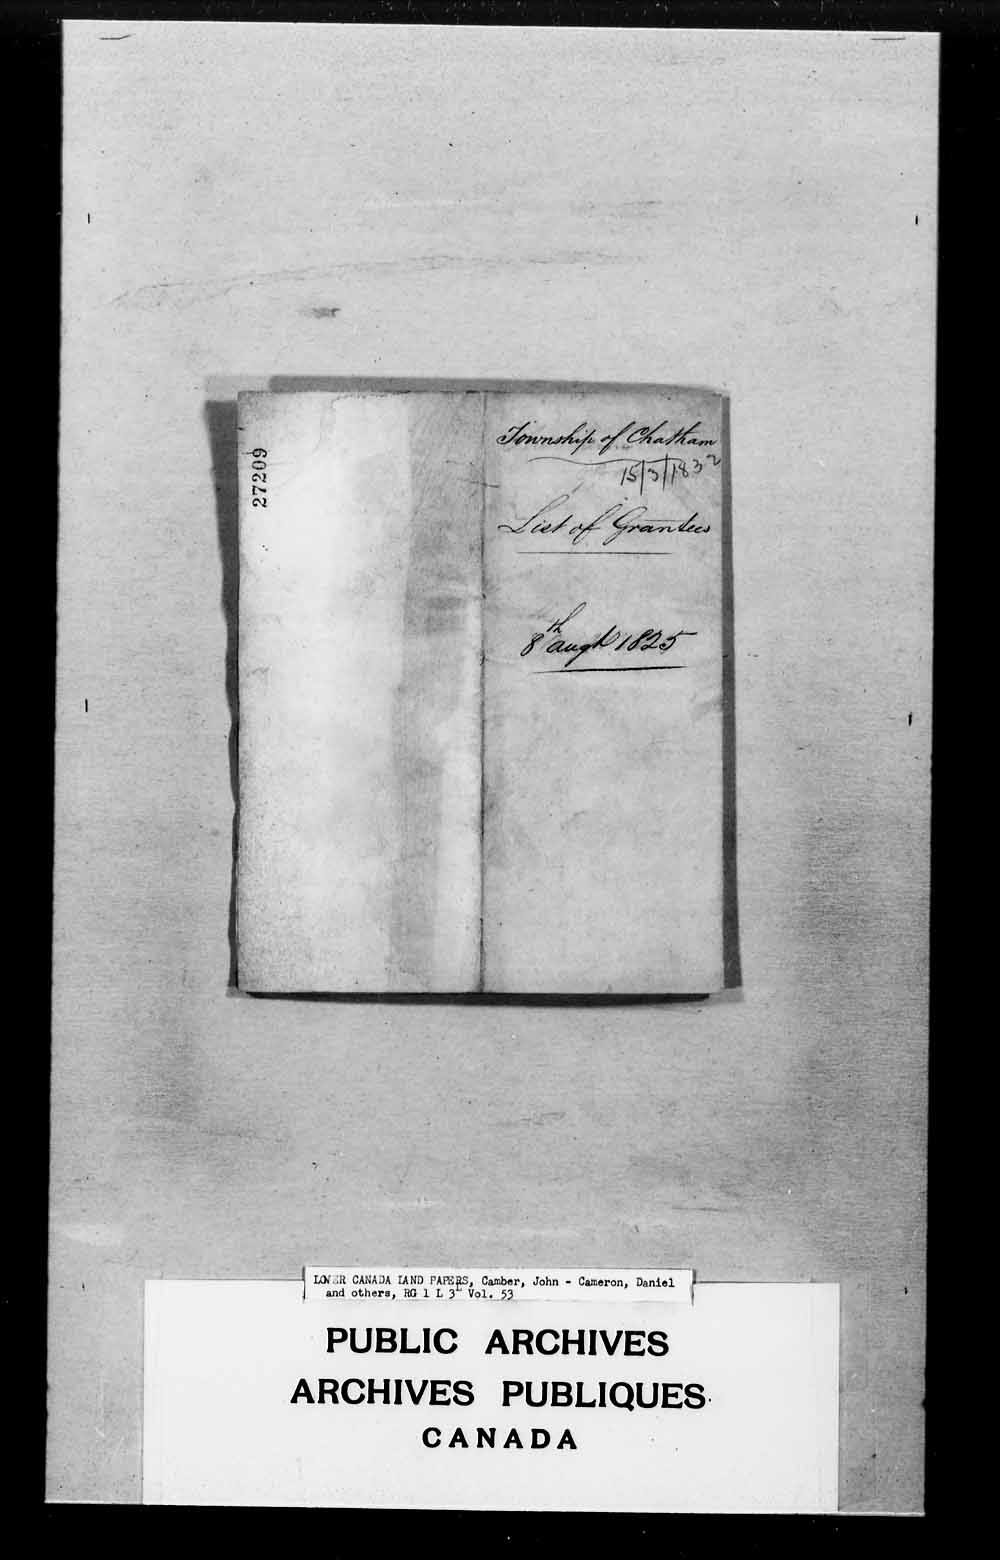 Digitized page of  for Image No.: e006611586